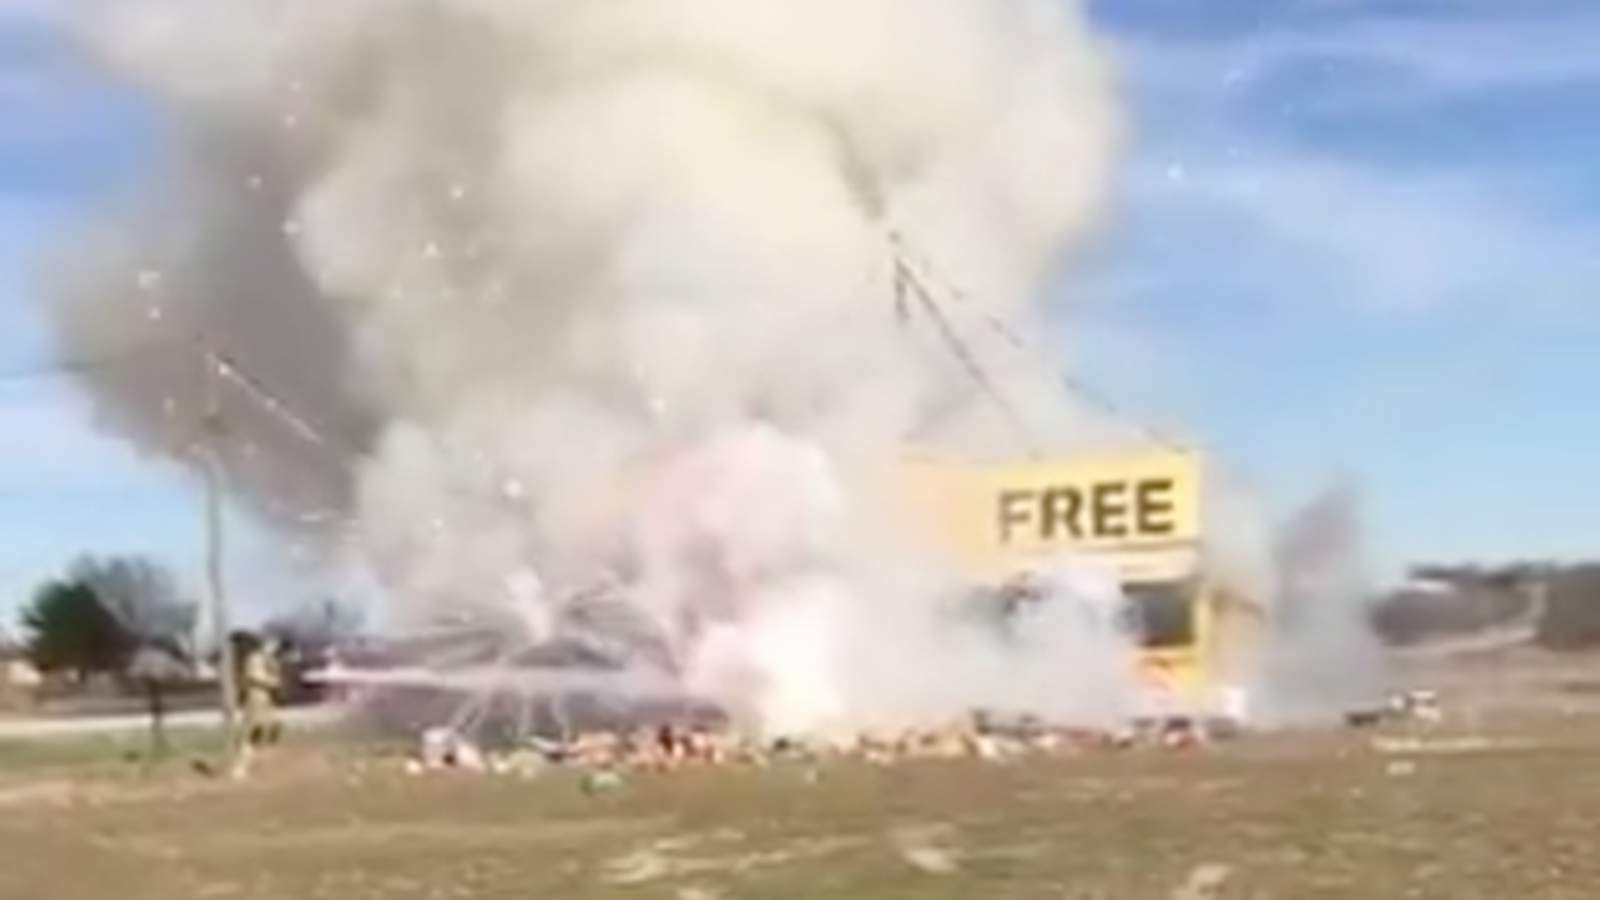 Central Texas fireworks stand catches fire